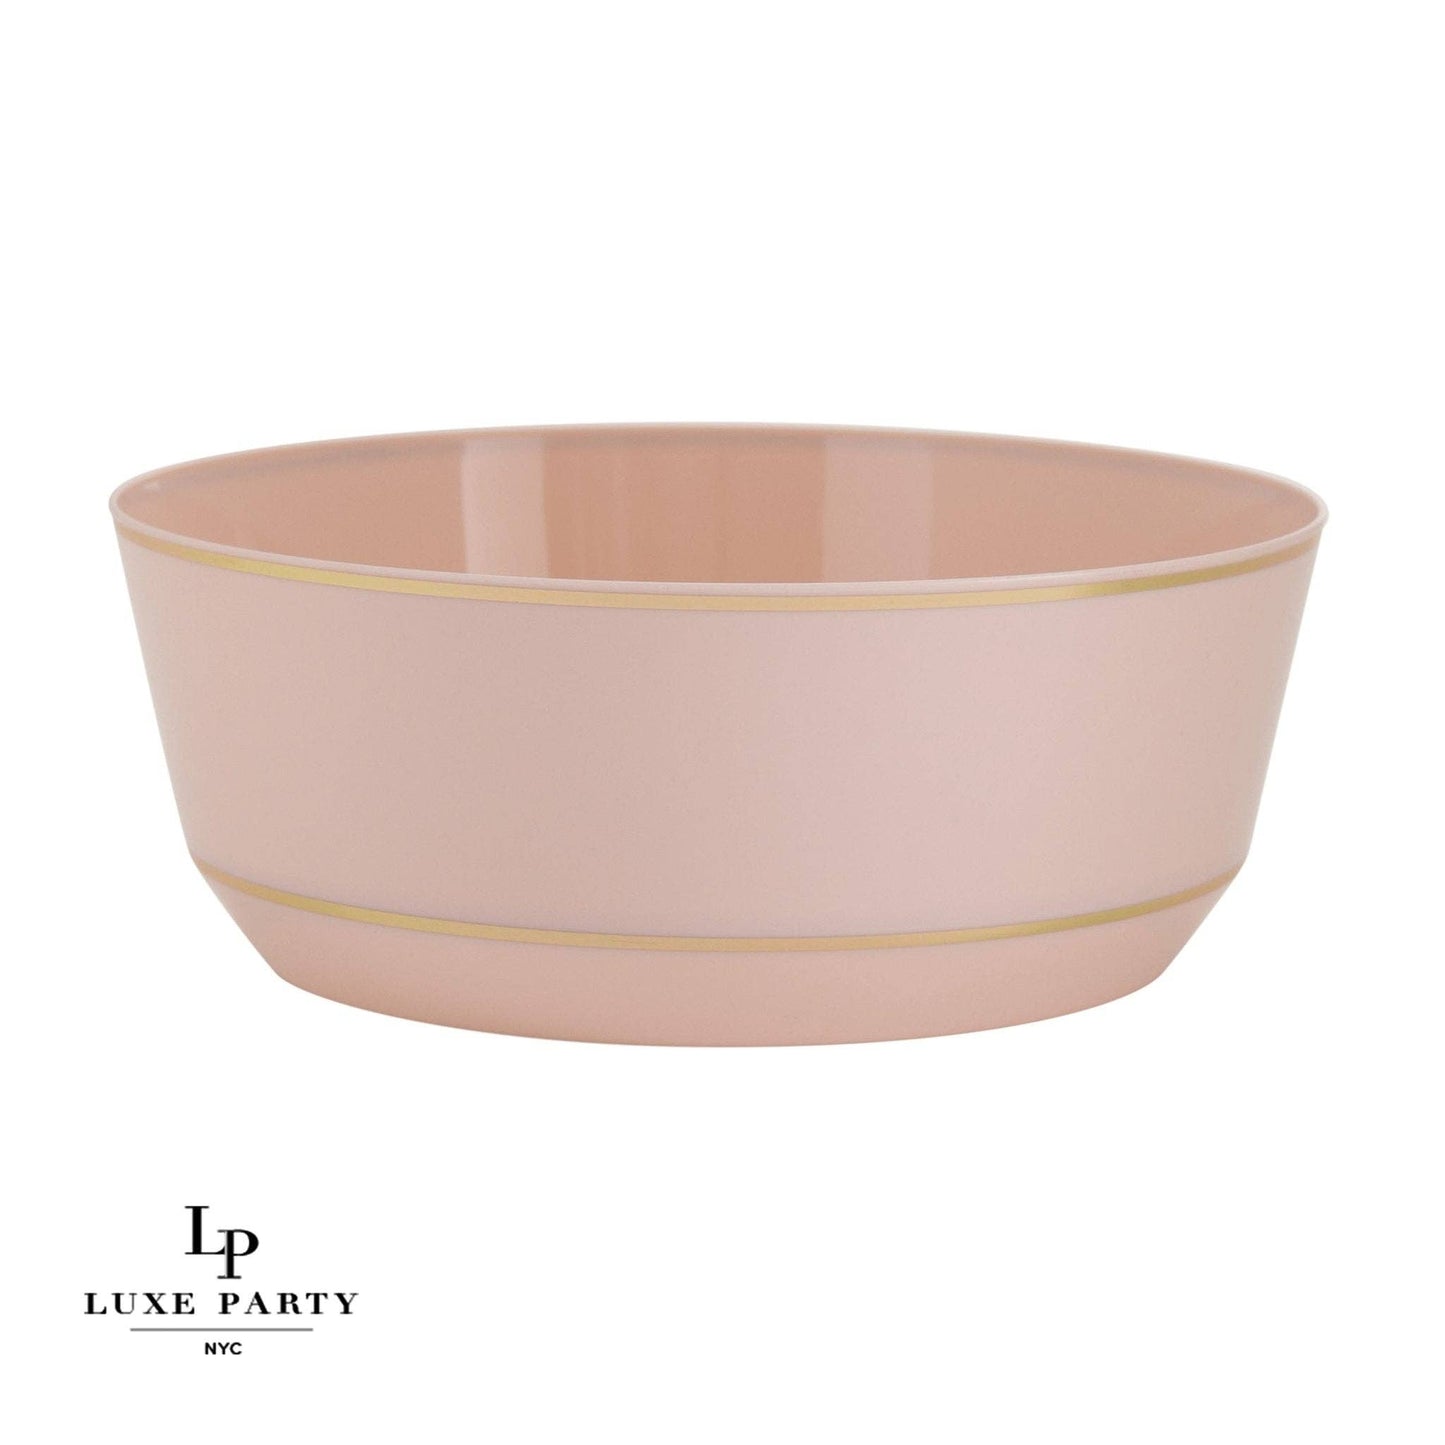 14 Oz. Plastic Bowls: Blush • Gold - DAMAGED/OPEN BOX - Sold As Is